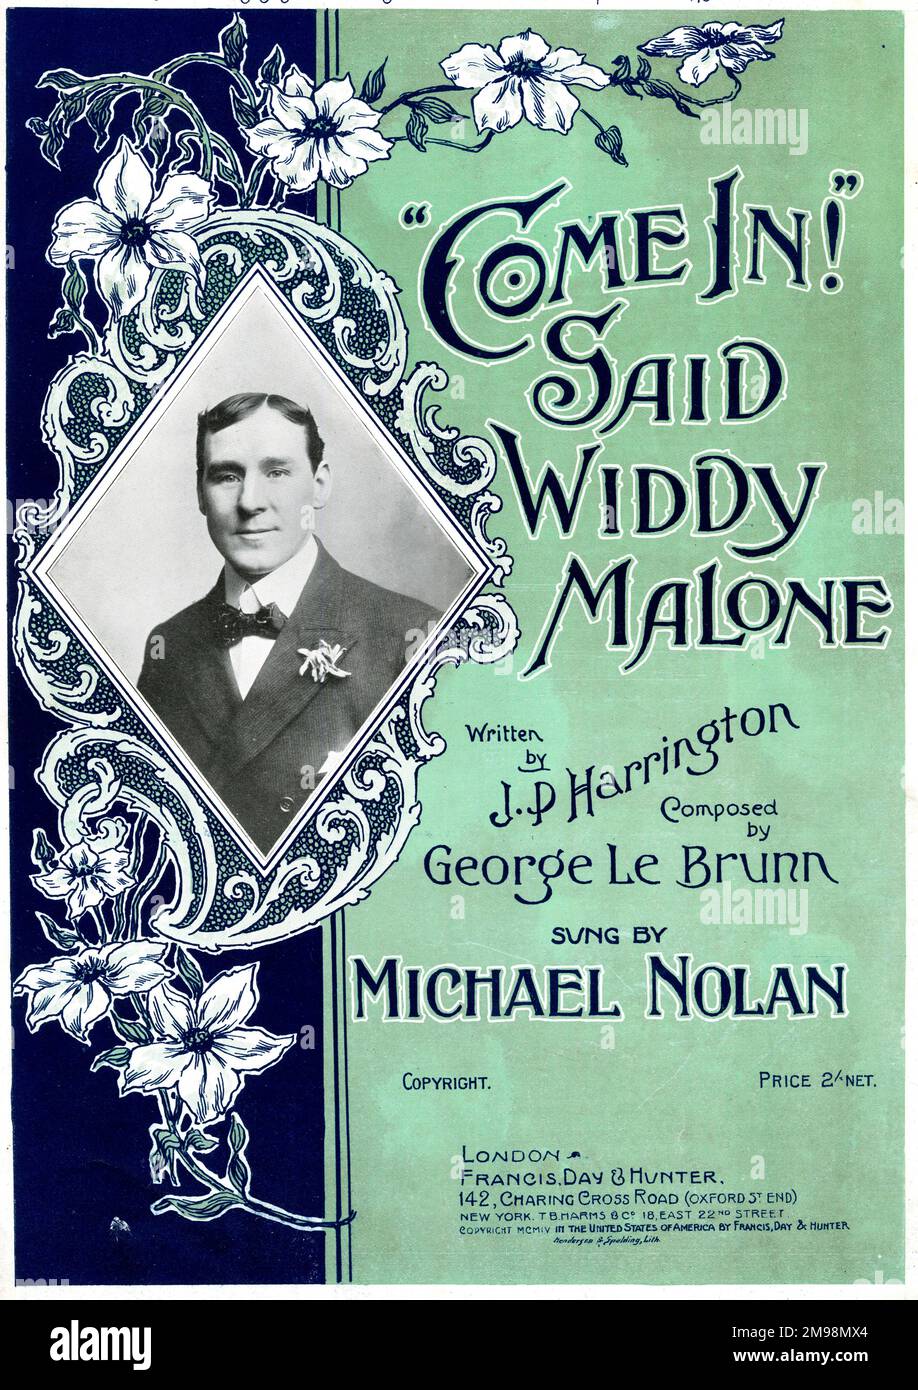 Music cover, Come In! said Widdy Malone, written by J P Harrington, composed by George Le Brunn, sung by Michael Nolan. Stock Photo